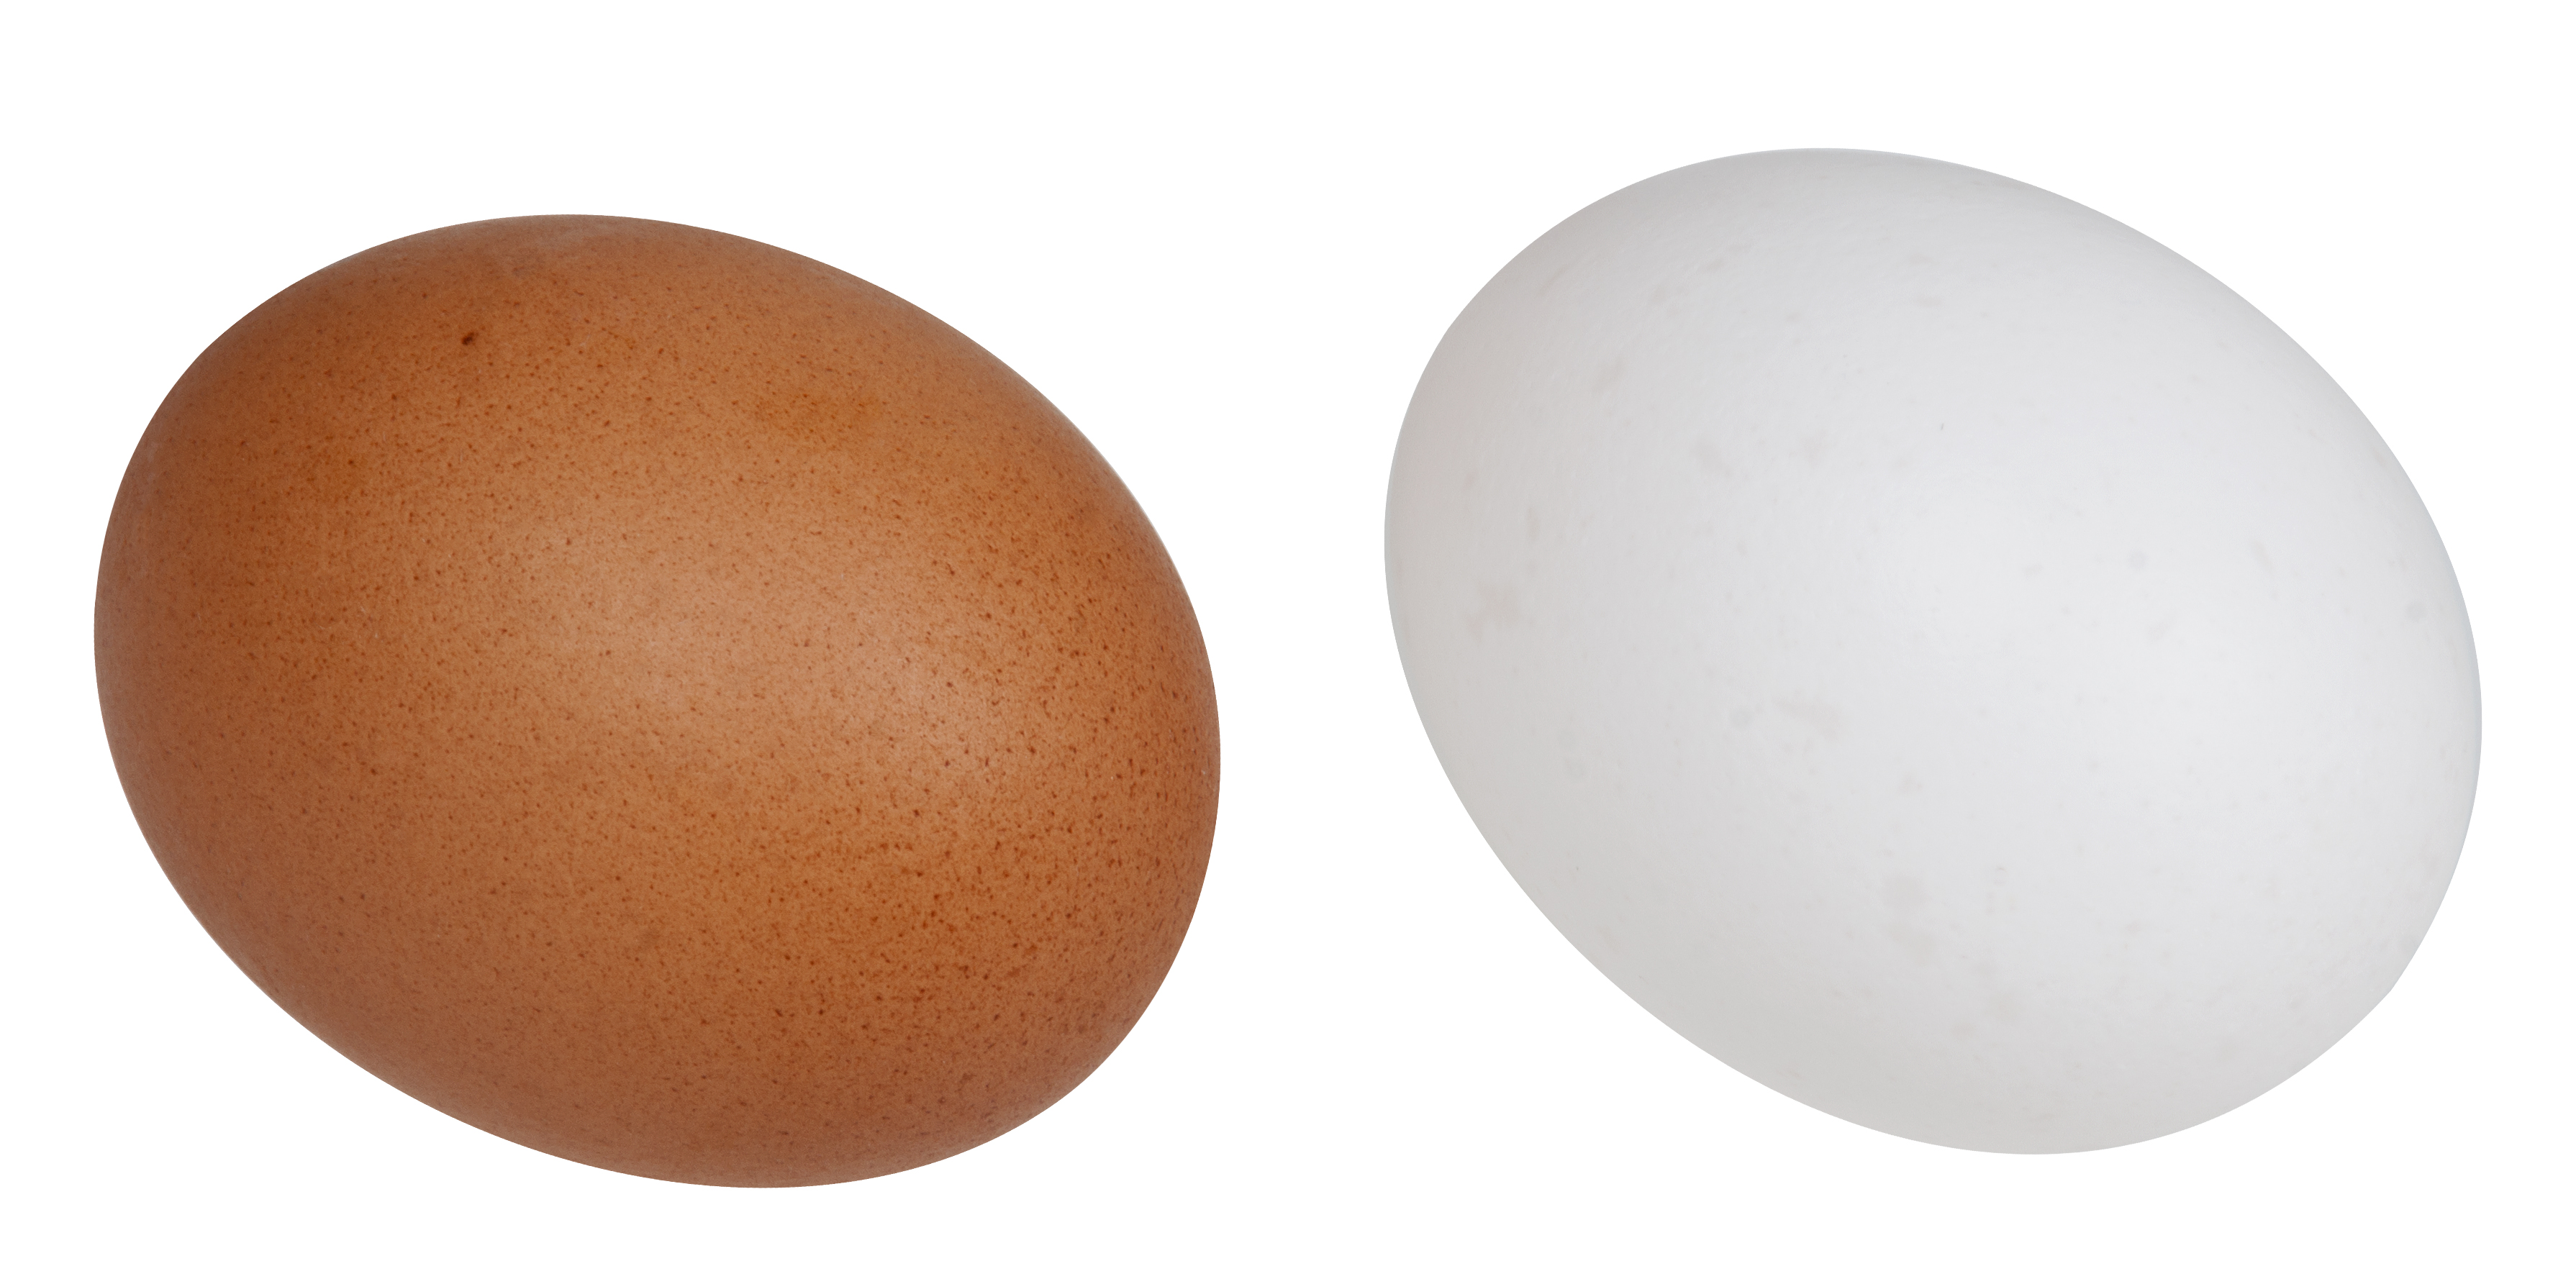 A brown and white chicken egg by Even-Amos